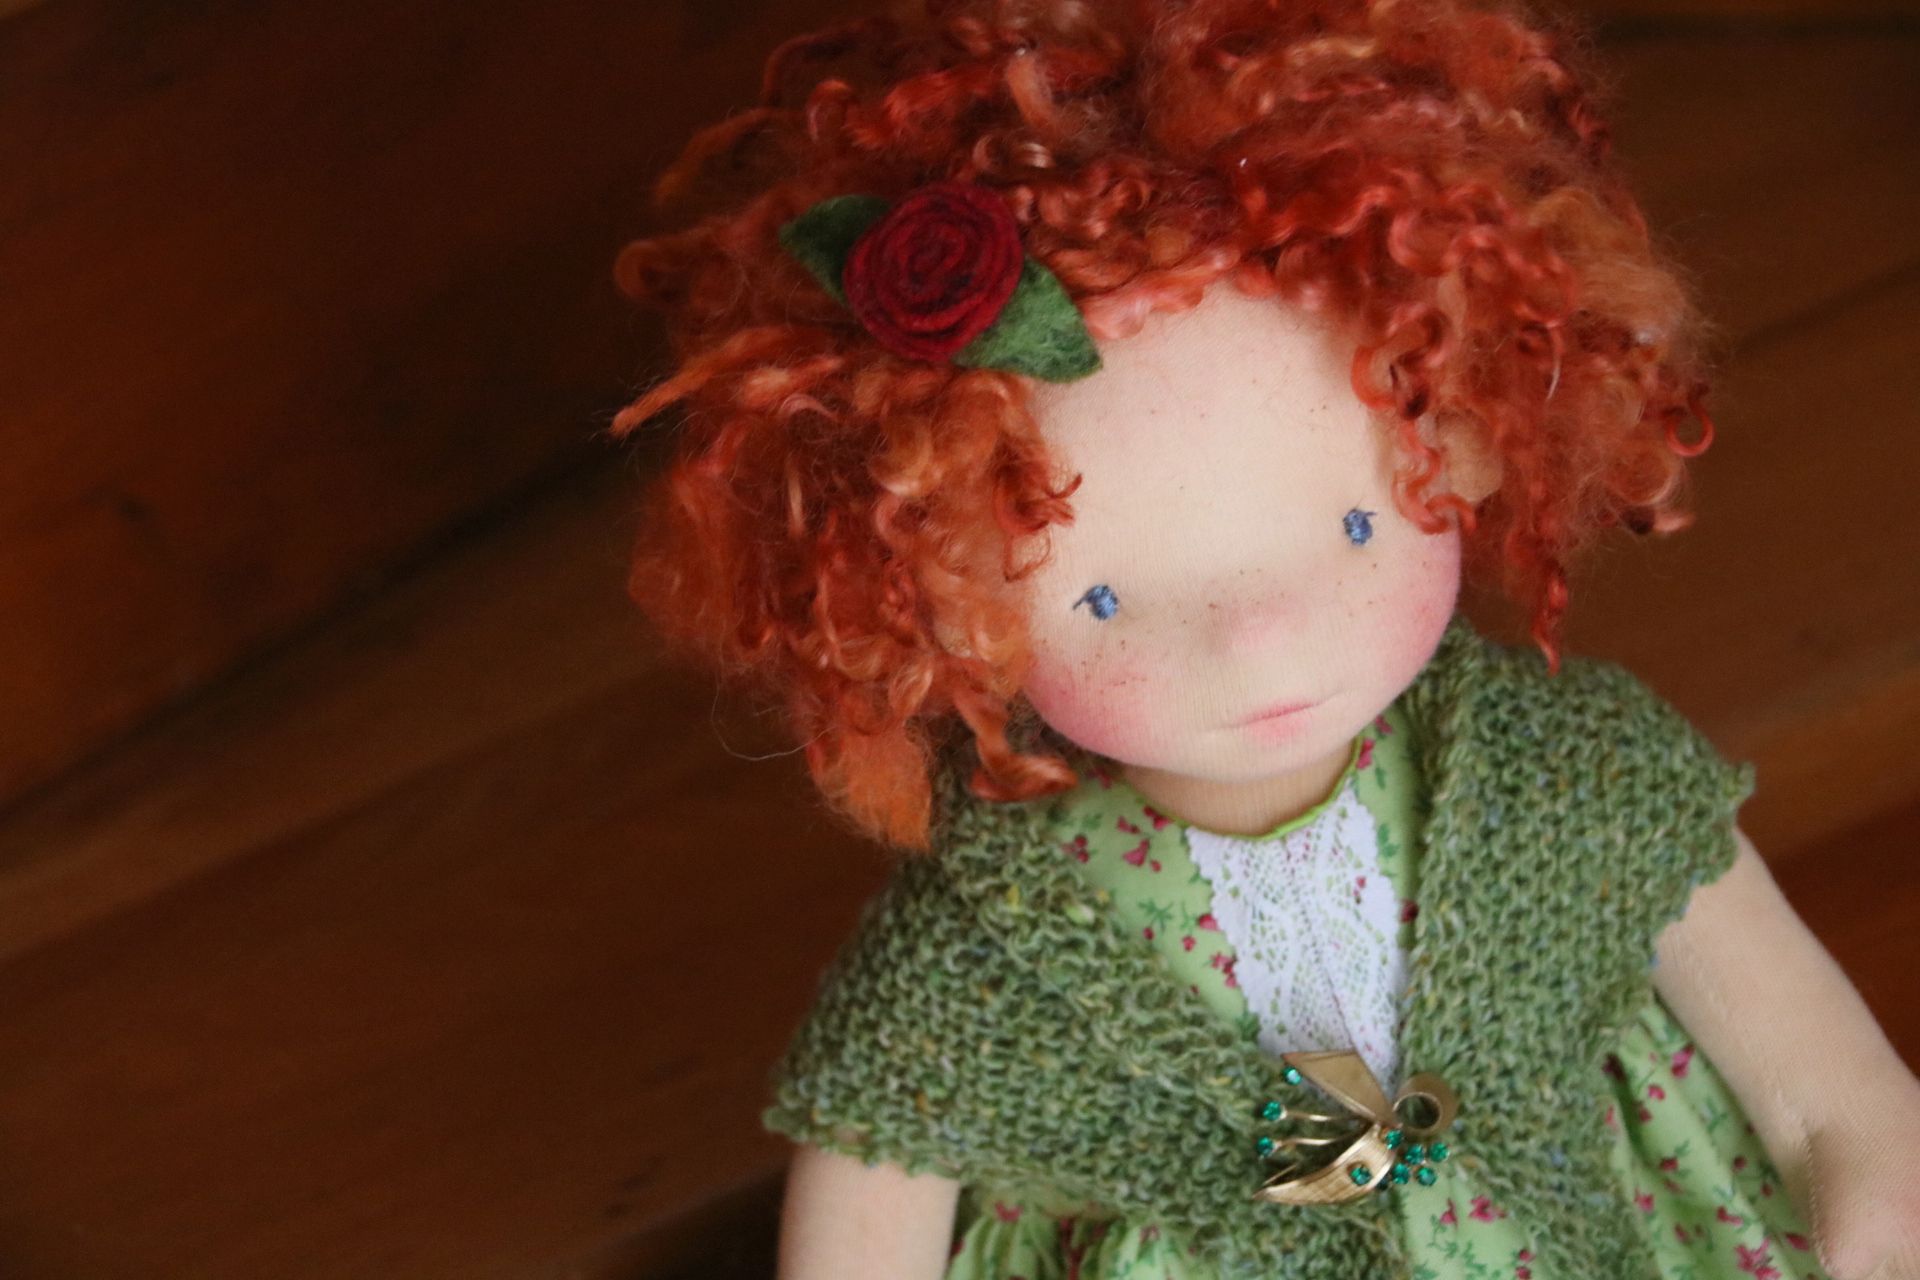 Aine is an OOAK natural fibers art doll, standing 16 inches (40cm) , designed and hanmade by Atelier Lavendel with lots of love and attention to details.